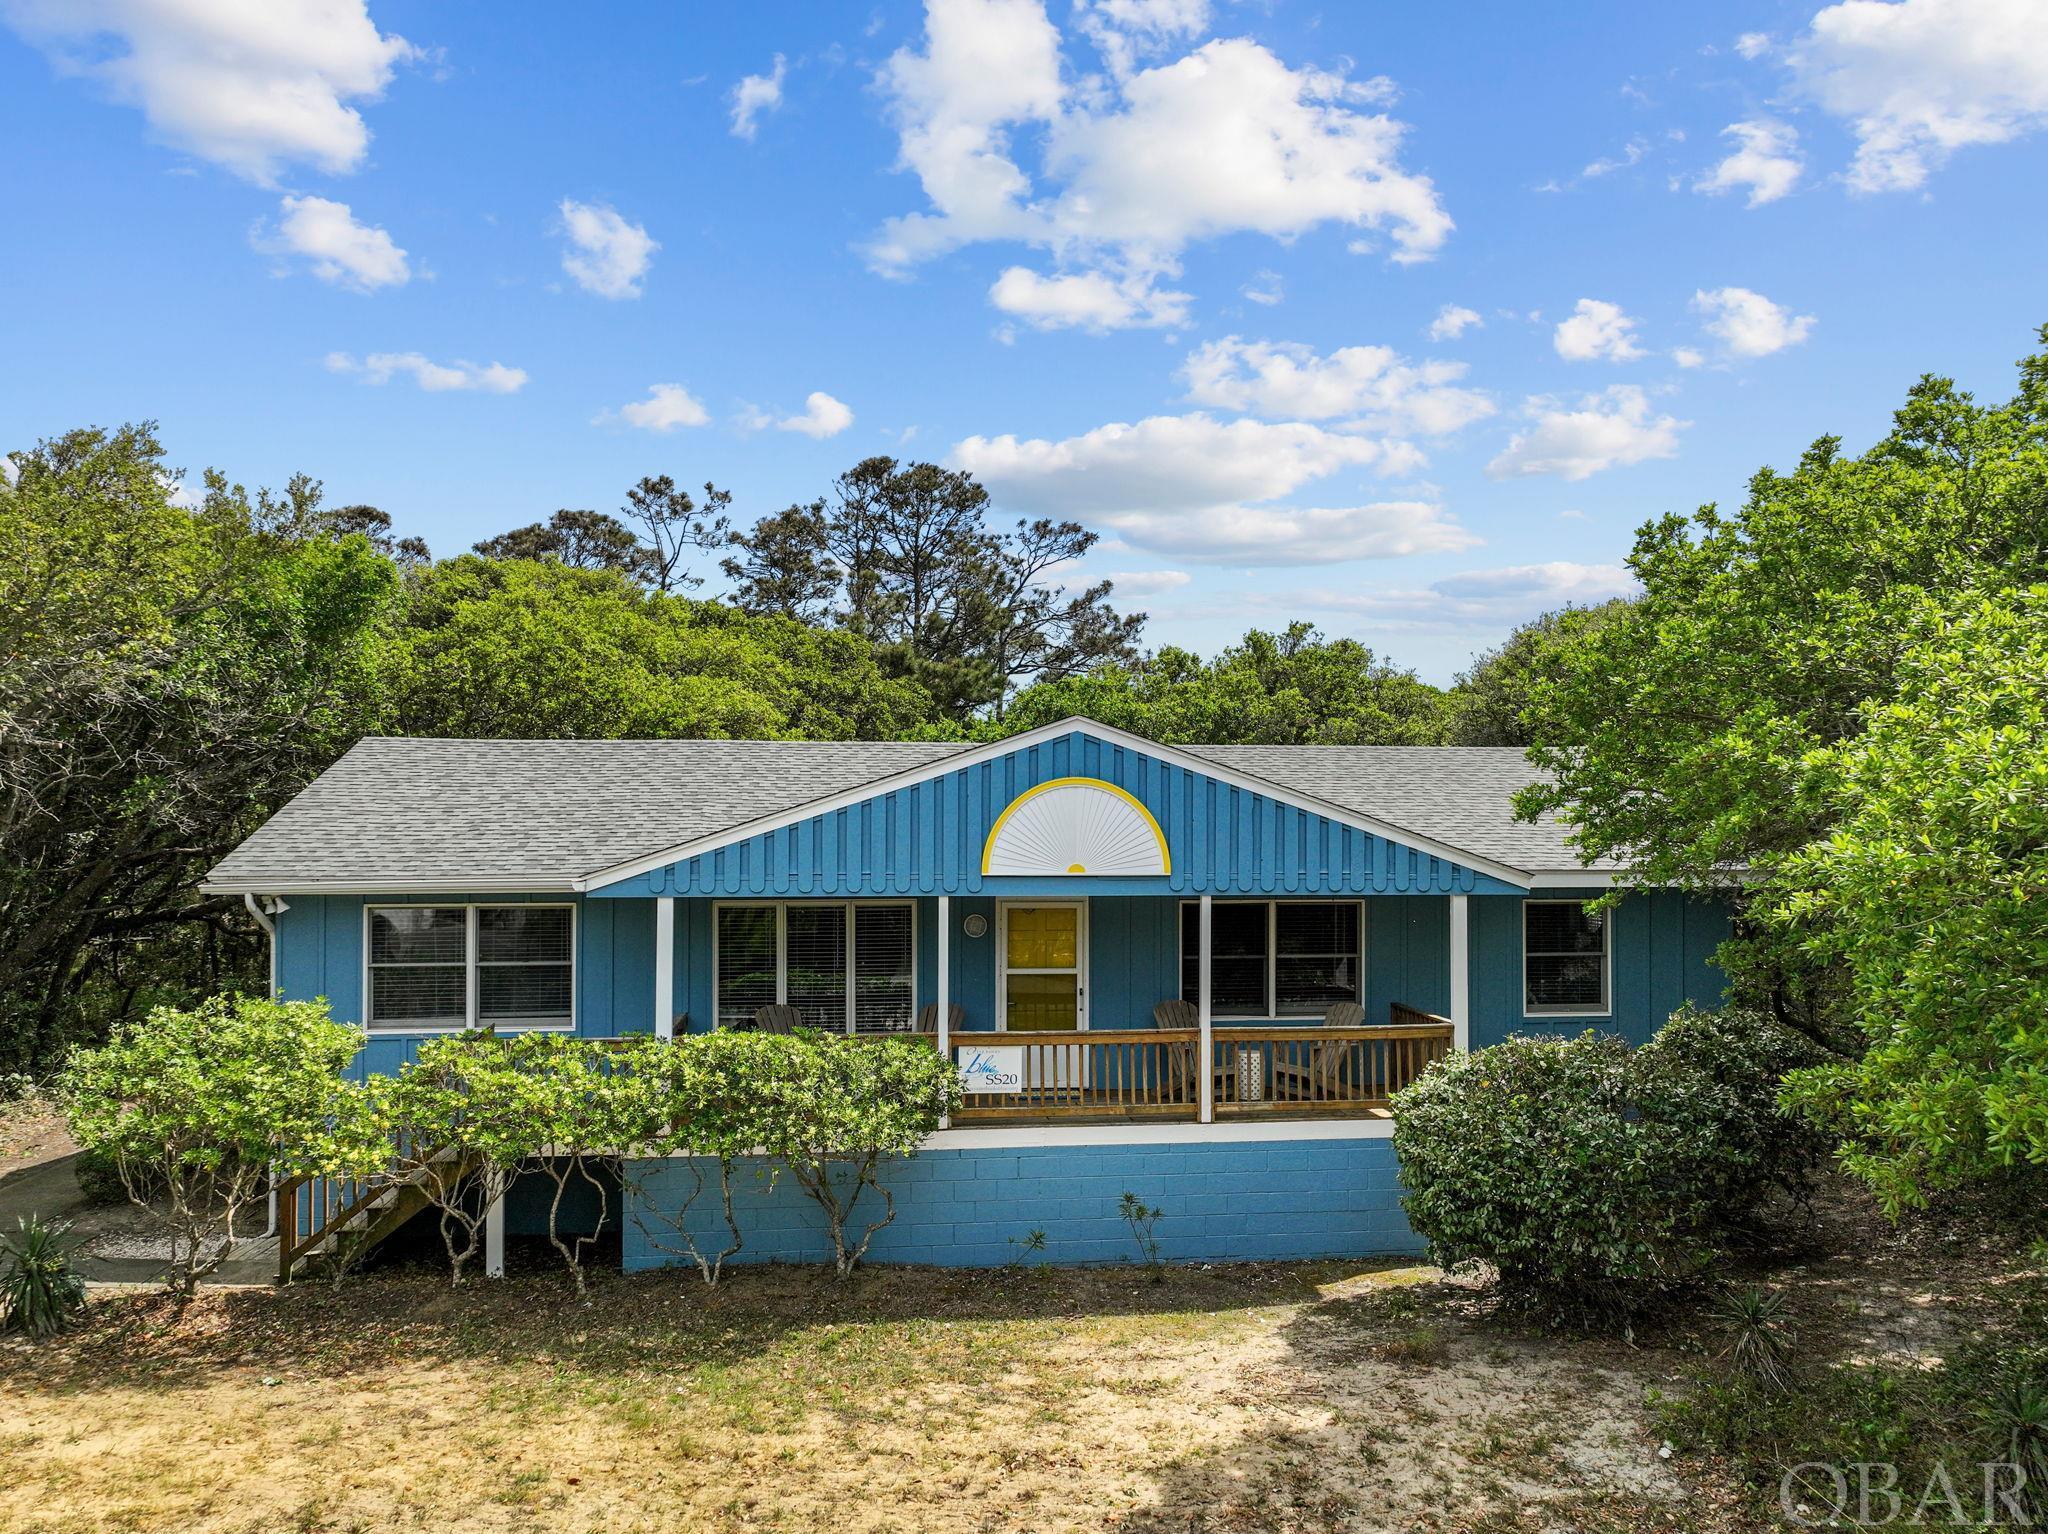 15 Seventh Avenue, Southern Shores, NC 27949, 5 Bedrooms Bedrooms, ,3 BathroomsBathrooms,Residential,For sale,Seventh Avenue,125548